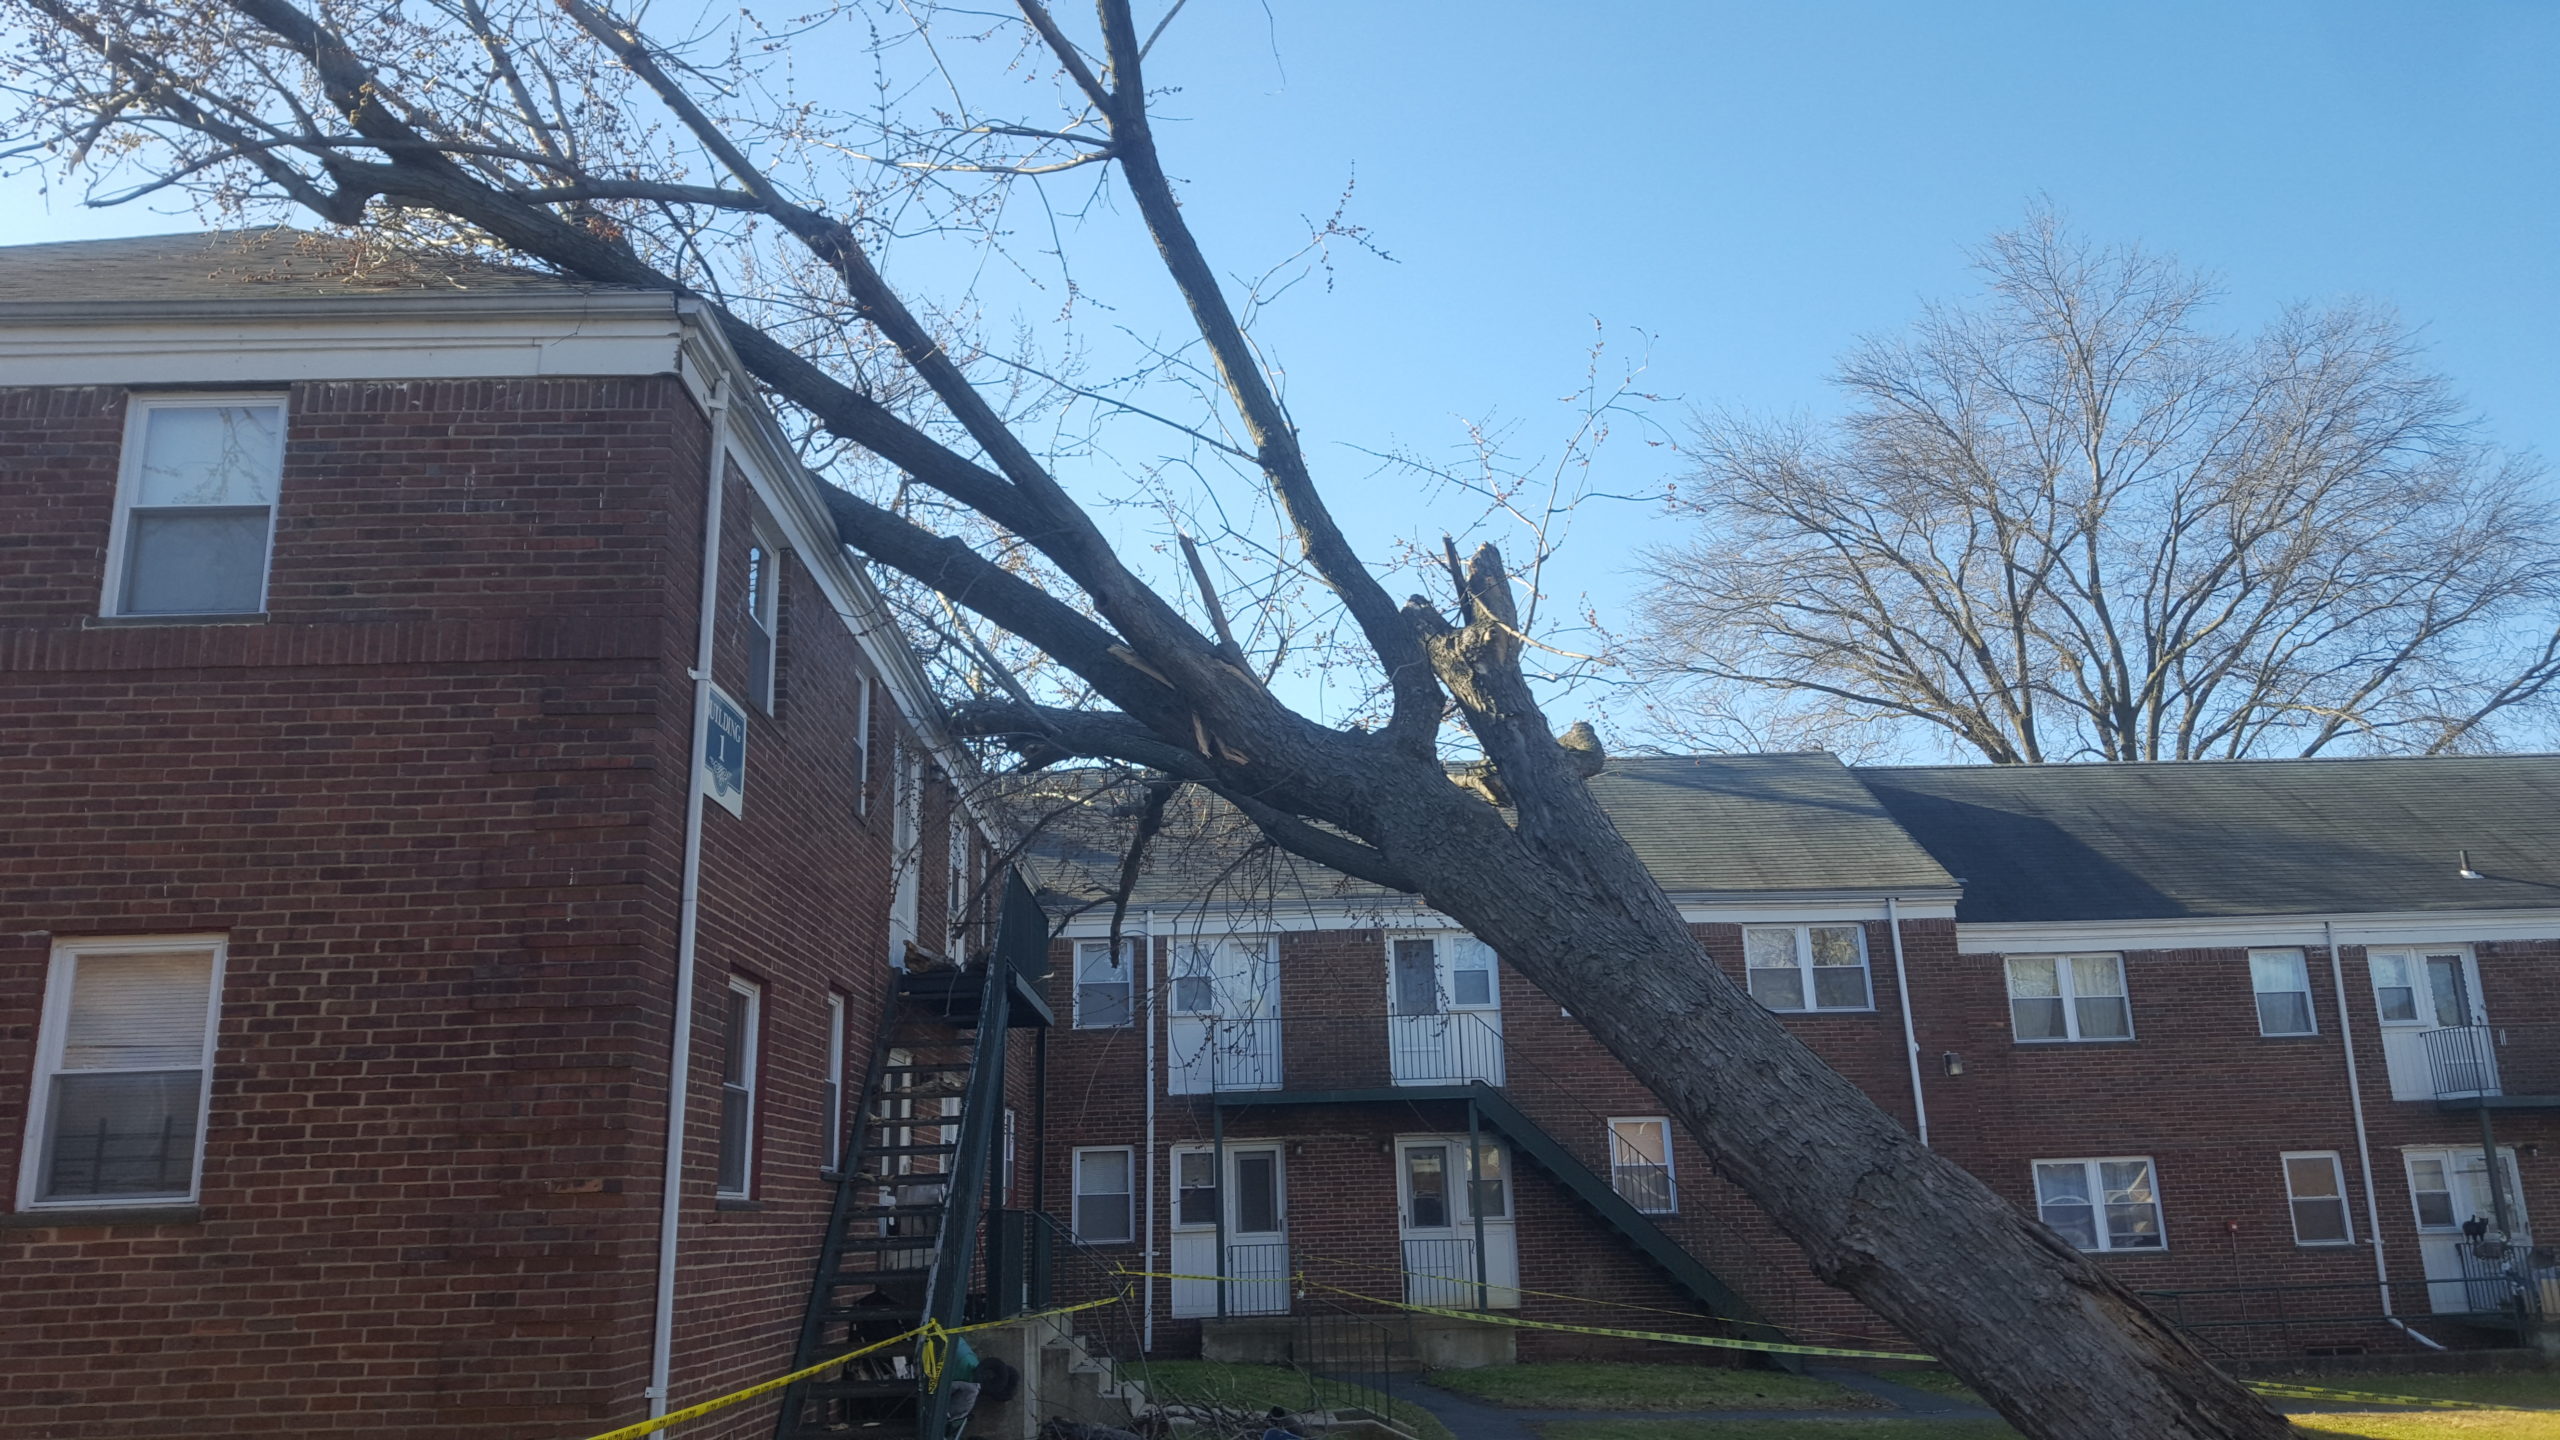 Tree Fell on Residence - NJ Storm Damage Services